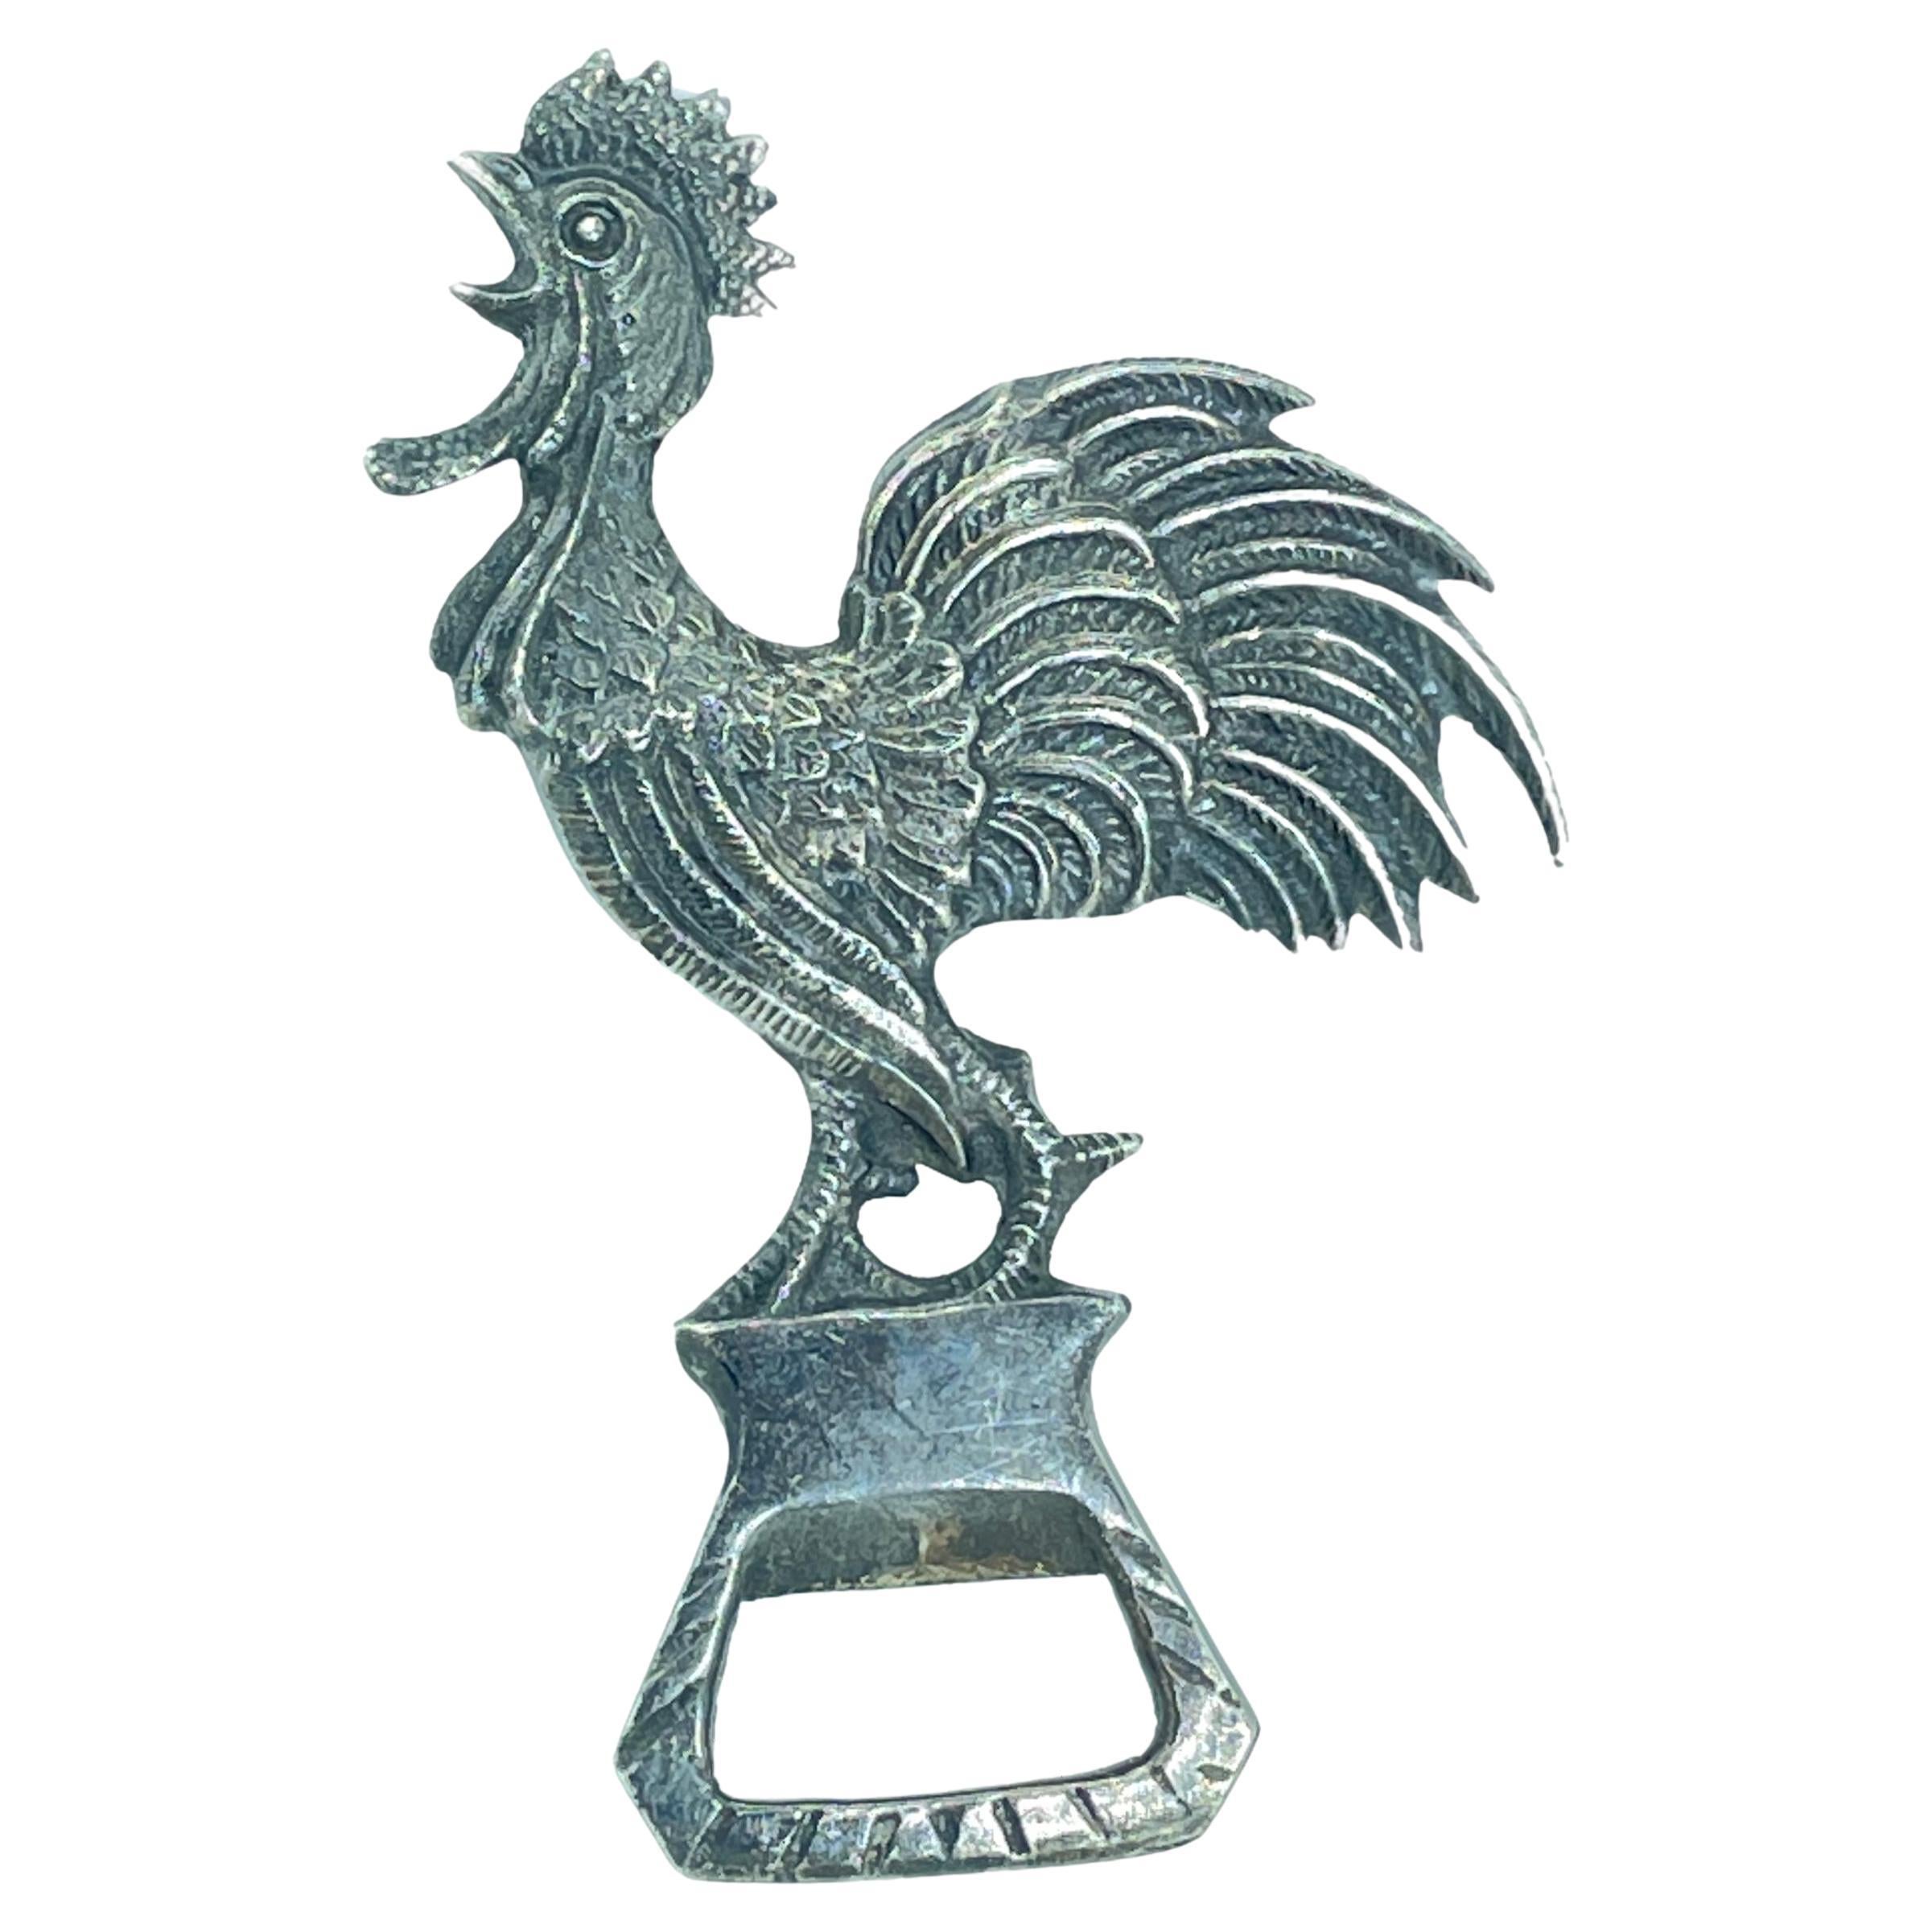 Rooster Vintage Bottle Opener Silver Plate Metal Breweriana Barware by Valenti For Sale